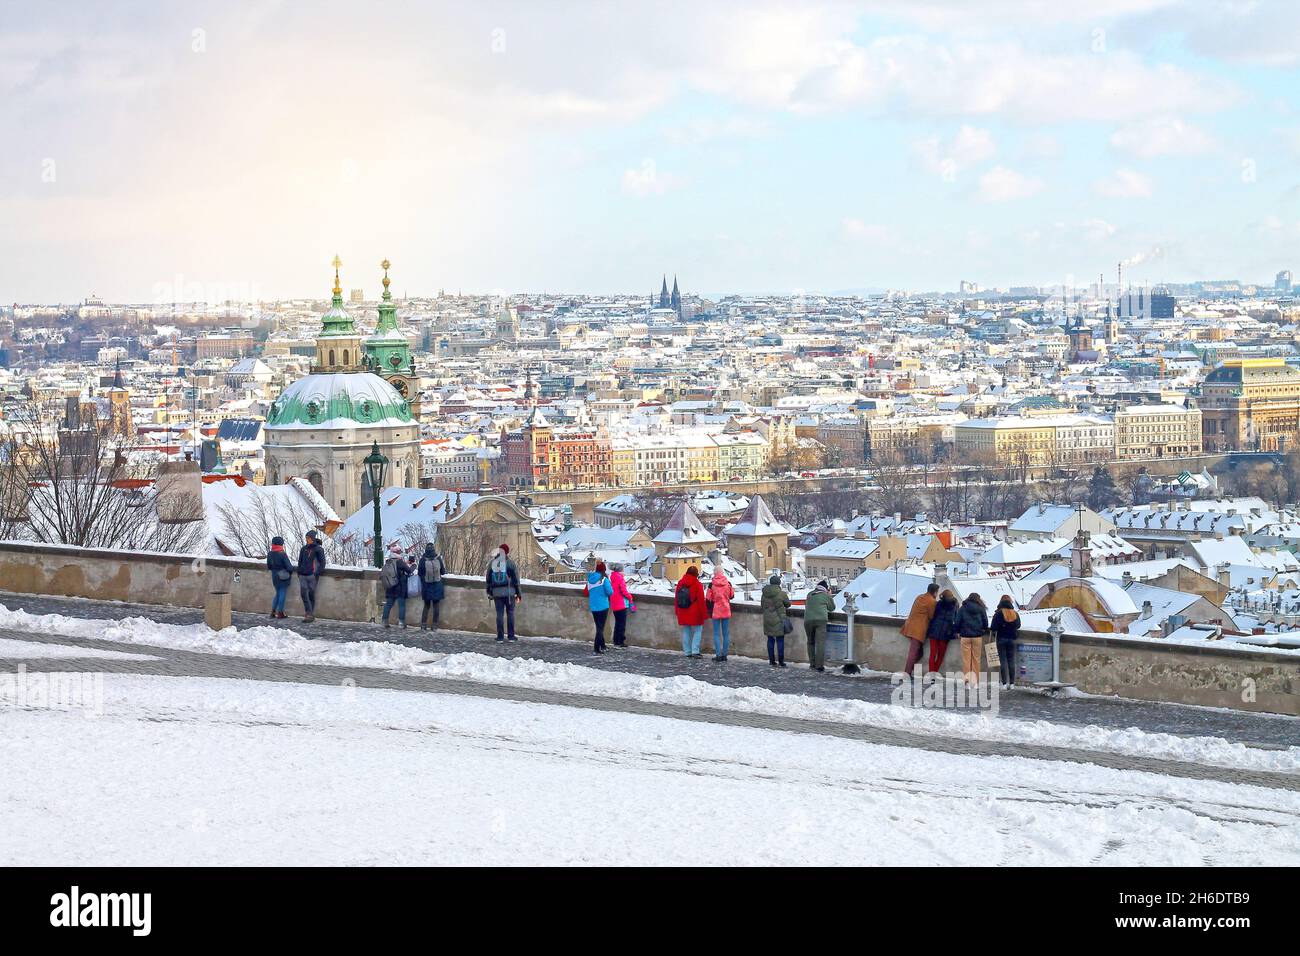 View of winters snowy Prague City, Czech Republic. Christmas time in Prague. Walking tourists see from Hradcany on old part of Prague - Mala Strana. Stock Photo